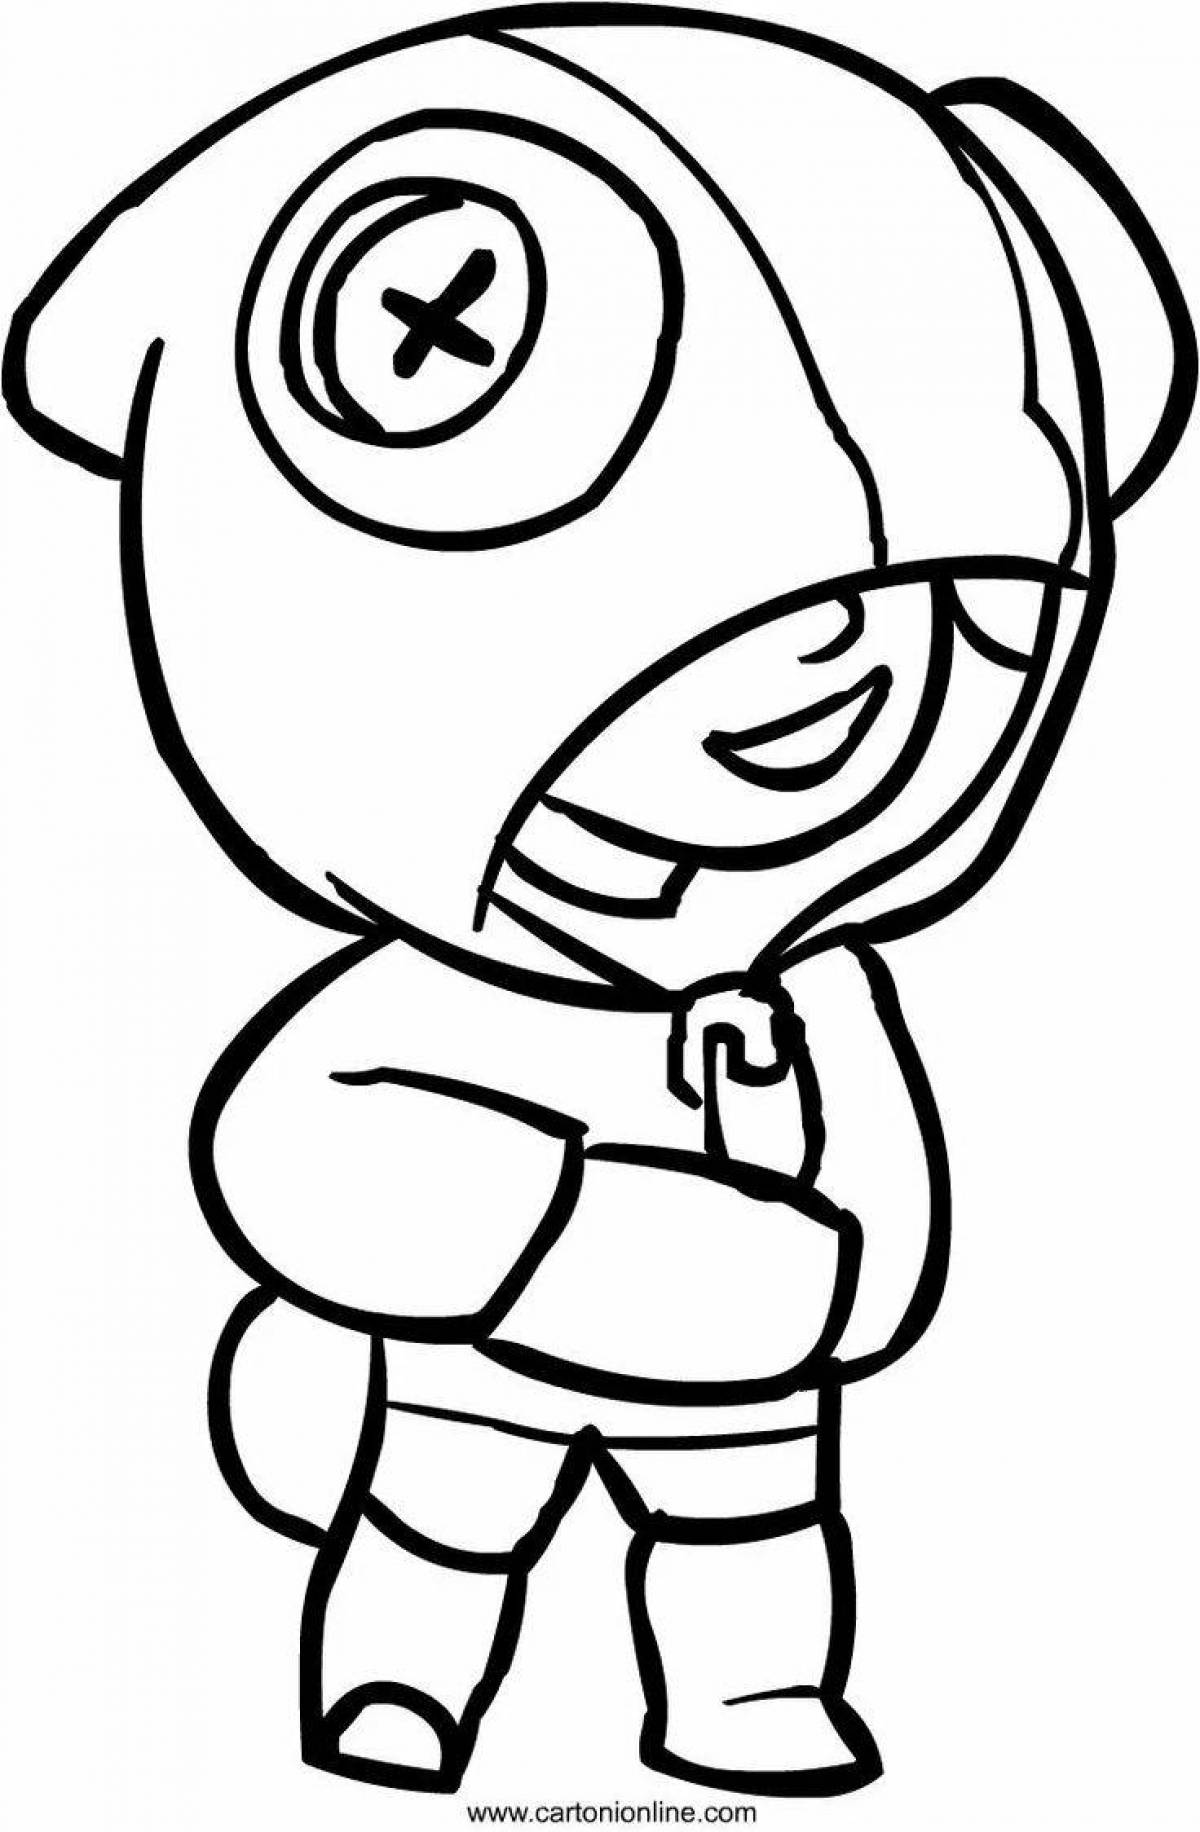 Irresistible brown stars coloring page